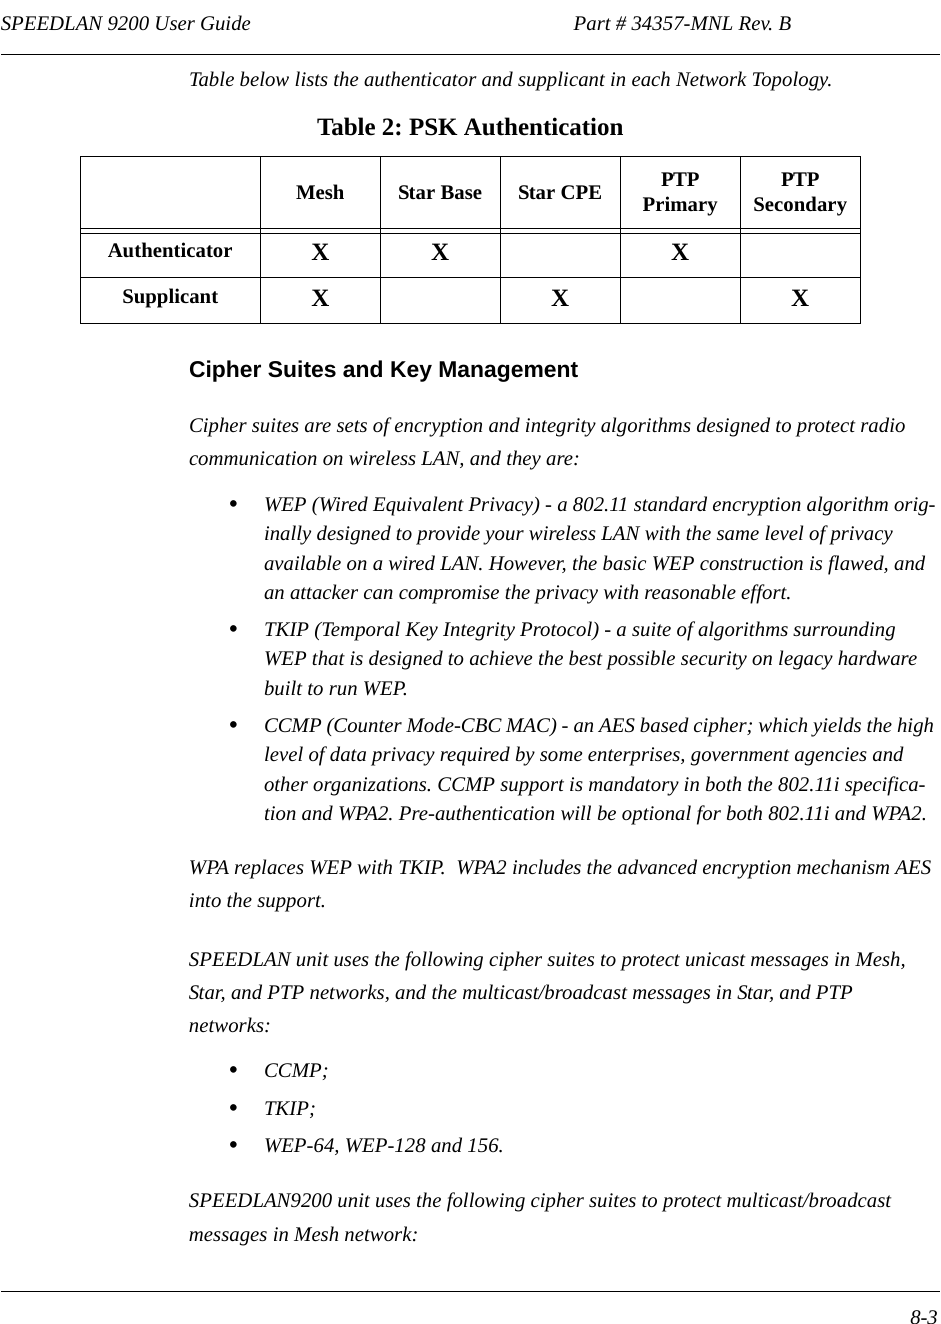 SPEEDLAN 9200 User Guide                                                              Part # 34357-MNL Rev. B      8-3                                                                                                                                                              Table below lists the authenticator and supplicant in each Network Topology.Cipher Suites and Key ManagementCipher suites are sets of encryption and integrity algorithms designed to protect radio communication on wireless LAN, and they are:•WEP (Wired Equivalent Privacy) - a 802.11 standard encryption algorithm orig-inally designed to provide your wireless LAN with the same level of privacy available on a wired LAN. However, the basic WEP construction is flawed, and an attacker can compromise the privacy with reasonable effort.•TKIP (Temporal Key Integrity Protocol) - a suite of algorithms surrounding WEP that is designed to achieve the best possible security on legacy hardware built to run WEP. •CCMP (Counter Mode-CBC MAC) - an AES based cipher; which yields the high level of data privacy required by some enterprises, government agencies and other organizations. CCMP support is mandatory in both the 802.11i specifica-tion and WPA2. Pre-authentication will be optional for both 802.11i and WPA2. WPA replaces WEP with TKIP.  WPA2 includes the advanced encryption mechanism AES into the support.SPEEDLAN unit uses the following cipher suites to protect unicast messages in Mesh, Star, and PTP networks, and the multicast/broadcast messages in Star, and PTP networks:•CCMP;•TKIP;•WEP-64, WEP-128 and 156.SPEEDLAN9200 unit uses the following cipher suites to protect multicast/broadcast messages in Mesh network:Table 2: PSK AuthenticationMesh Star Base  Star CPE PTP Primary PTP SecondaryAuthenticator XX XSupplicant XXX